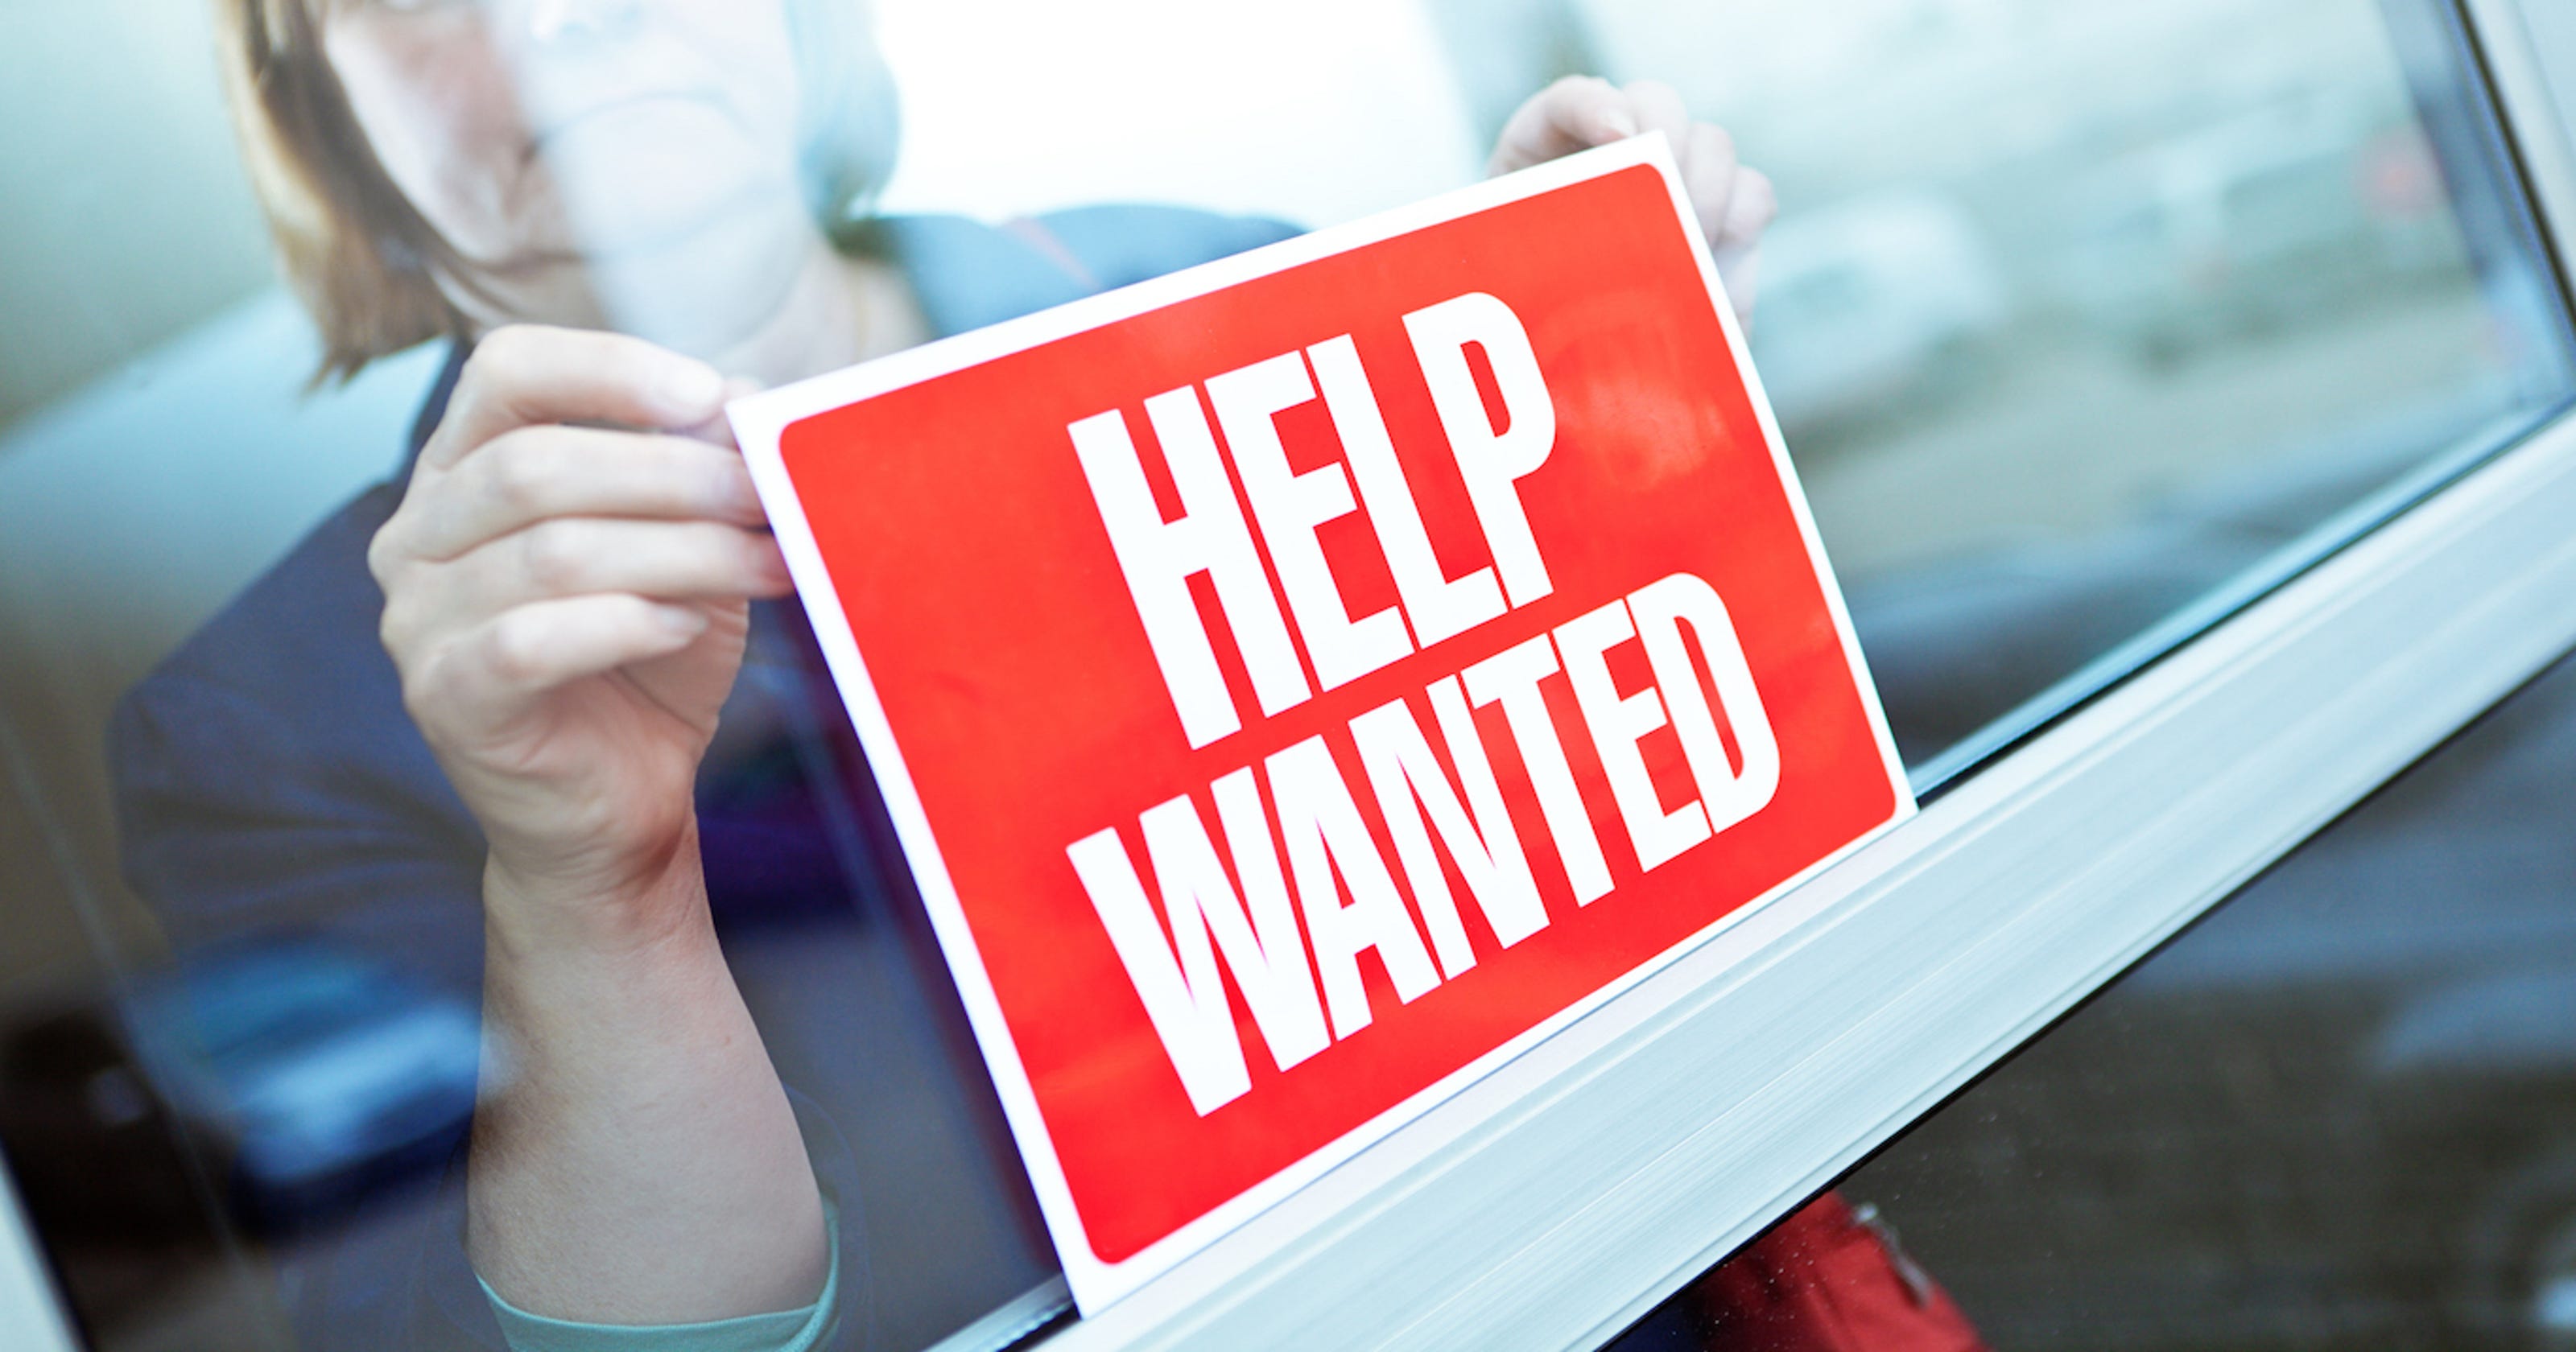 evansville-henderson-companies-still-have-help-wanted-signs